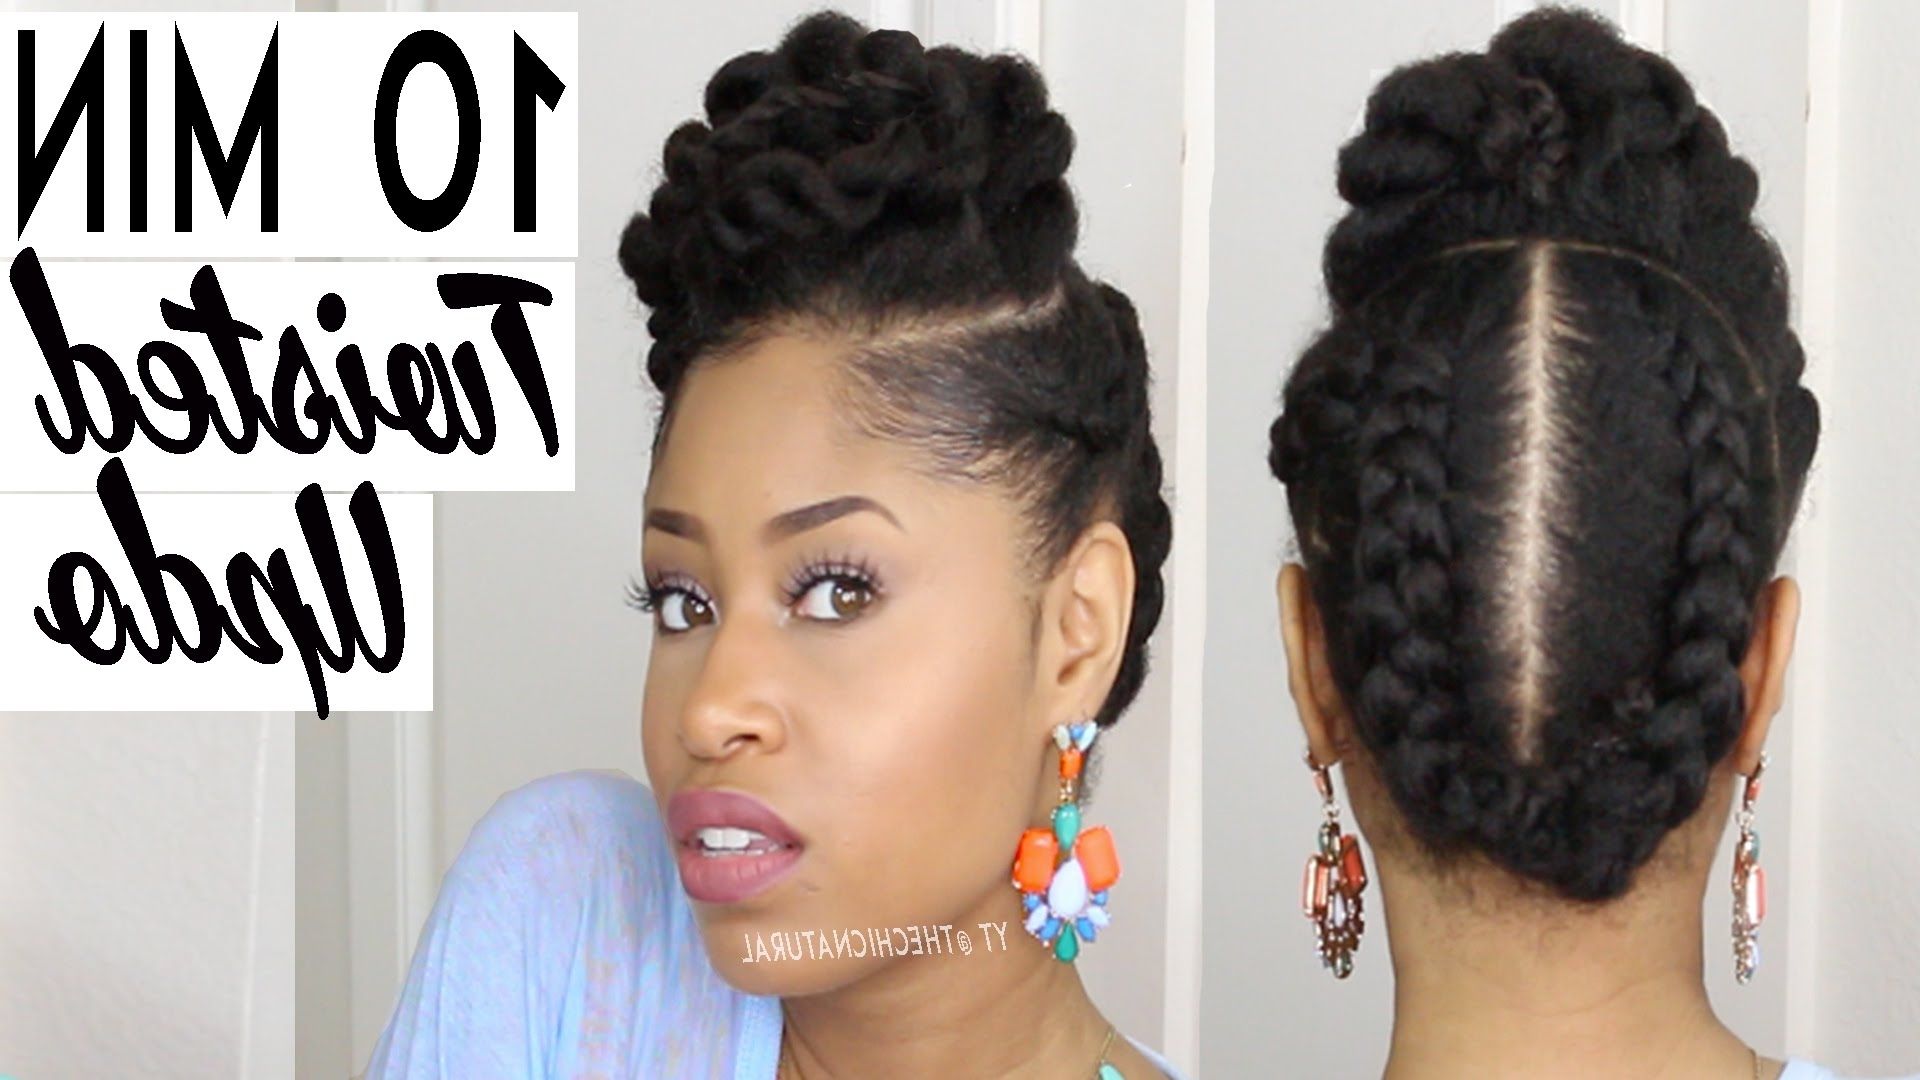 The 10 Minute Twisted Updo | Natural Hairstyle – Youtube Regarding Natural Hair Updo Hairstyles (View 2 of 15)